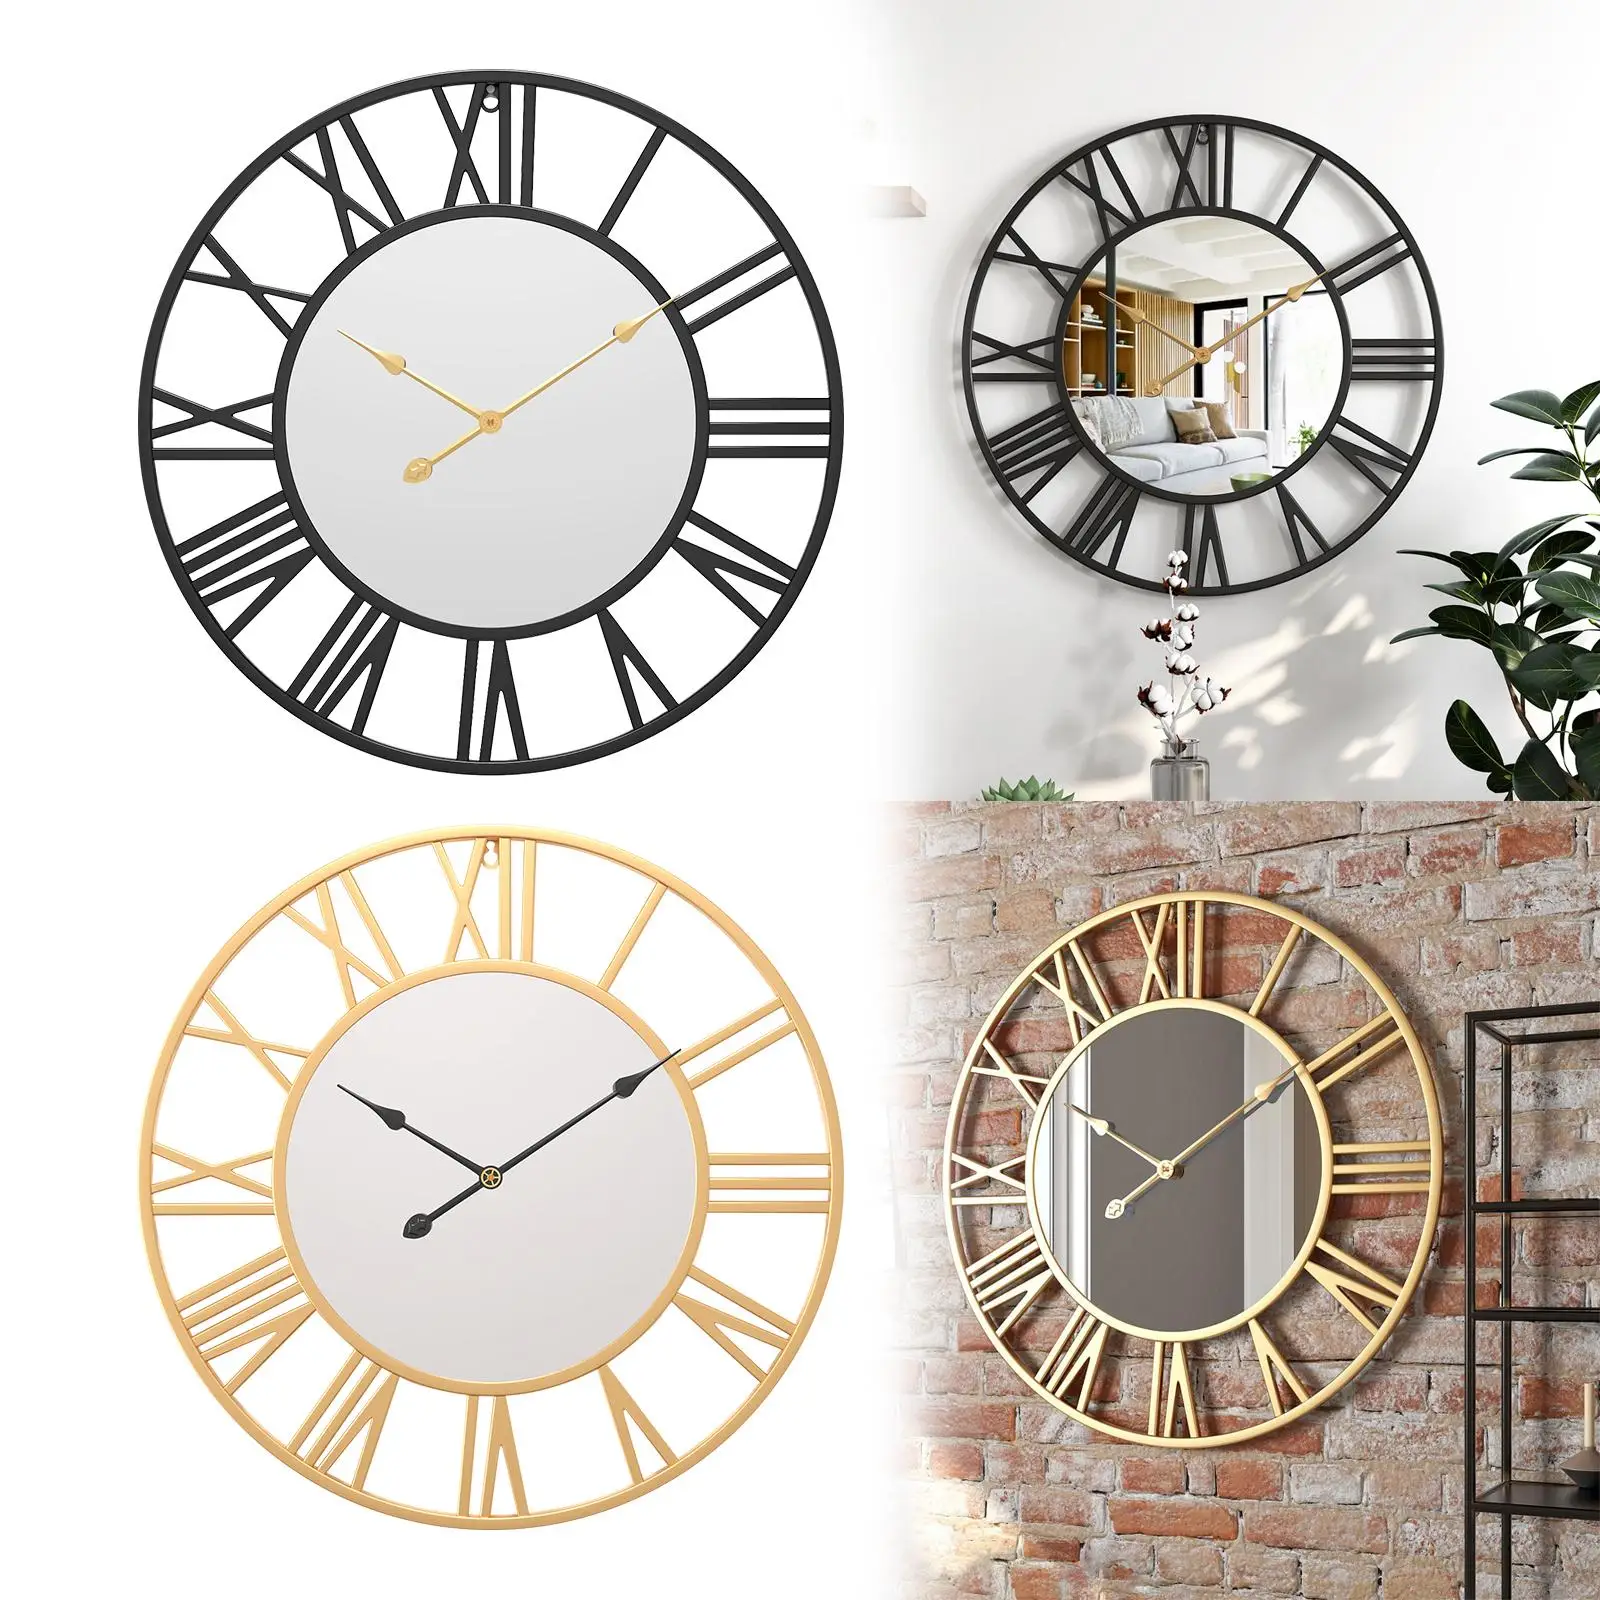 Silent Clock Decoration Roman Numerals 12H Display Round for Shops Living Room Schools Seniors Boys Girls images - 6